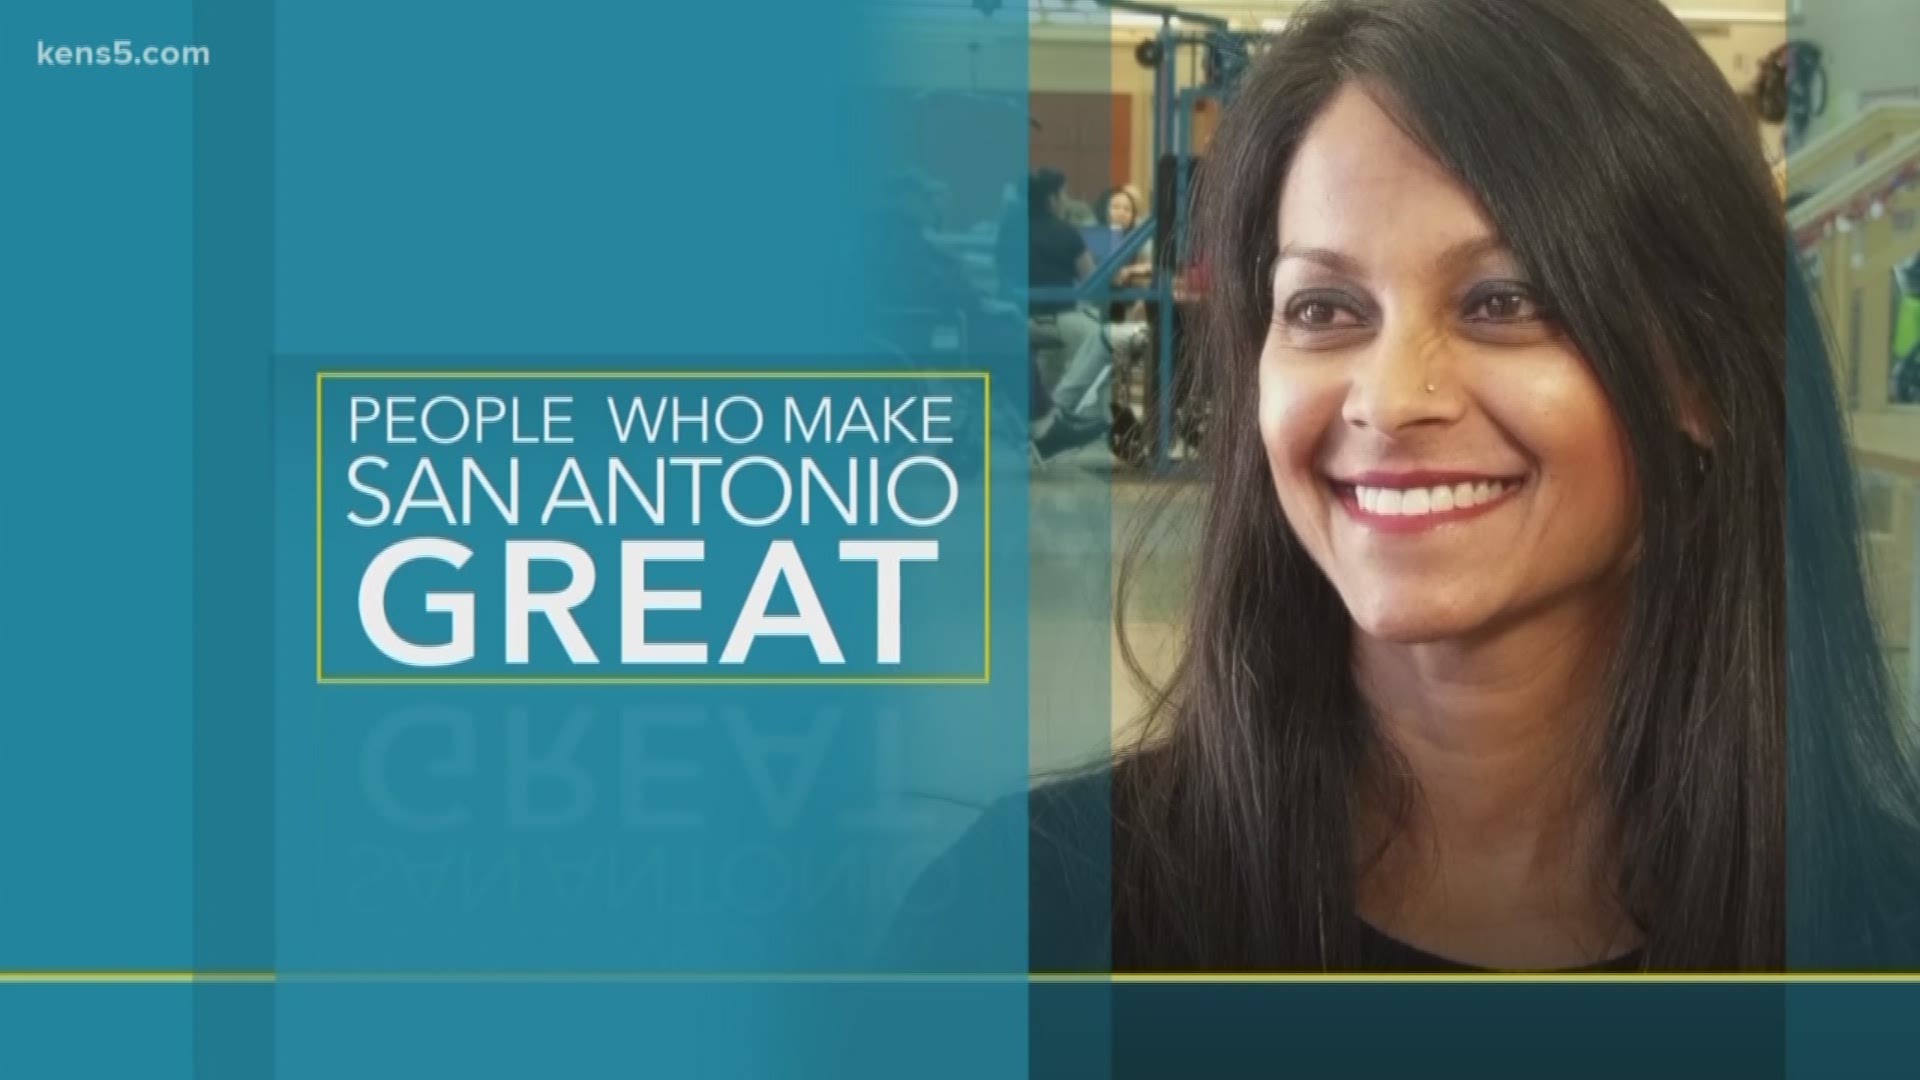 When Mona Patel lost her leg after a car accident, she had no resources to turn to in San Antonio. Now, she makes sure that no one will have to go through that again.